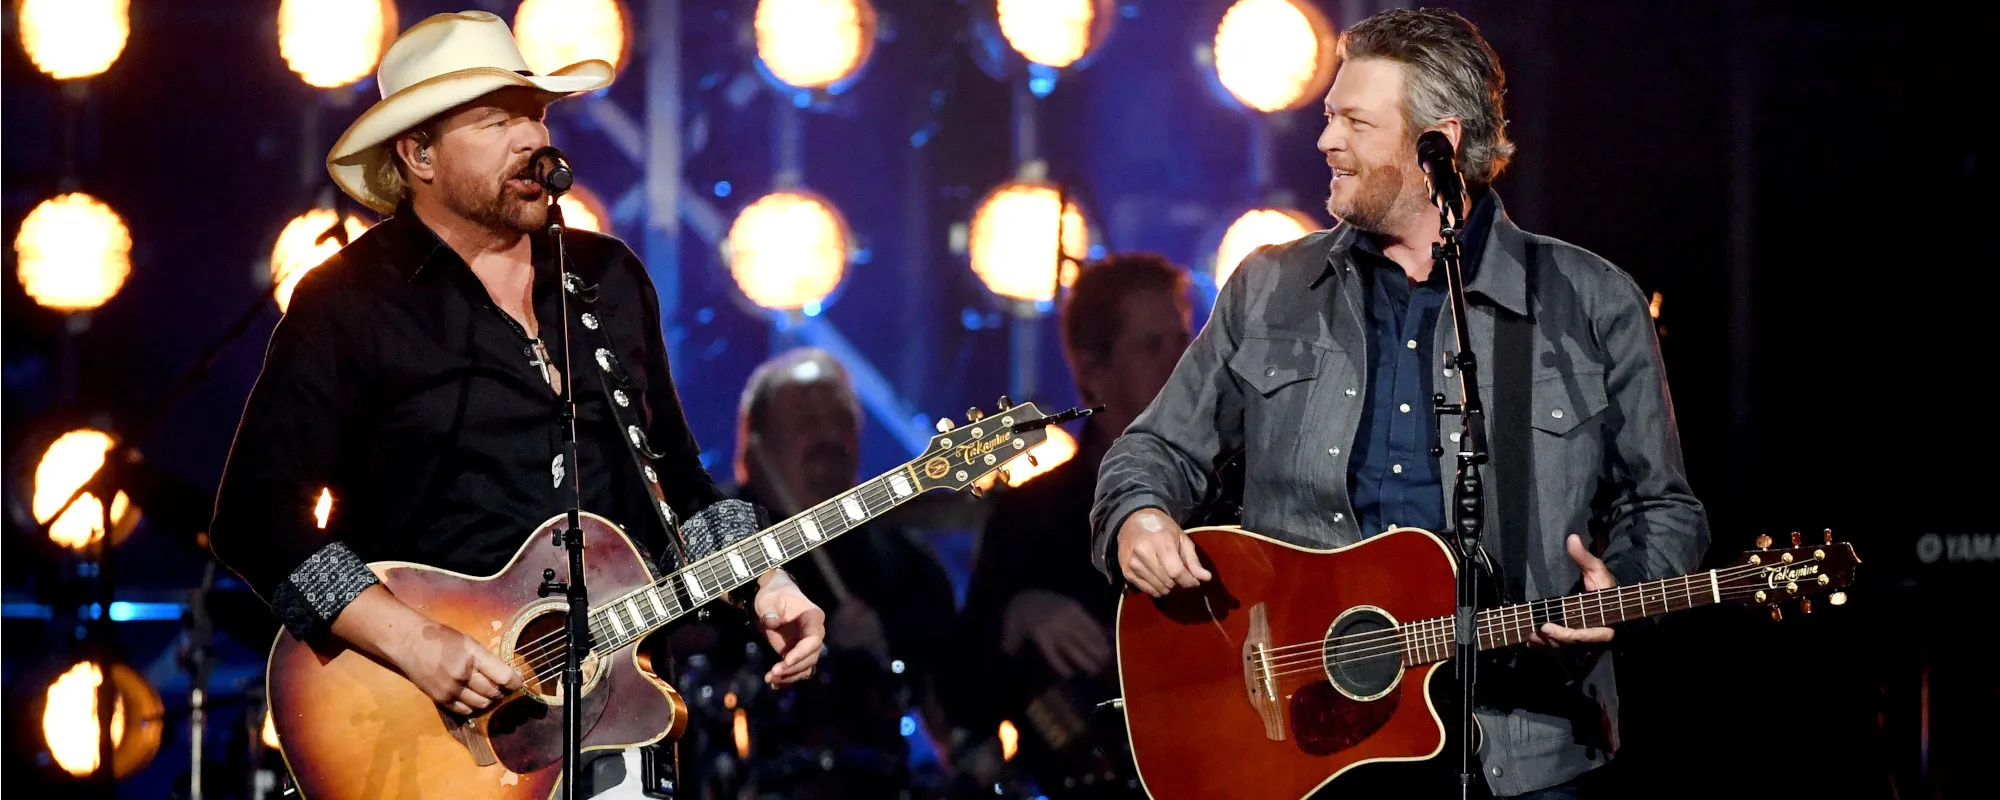 Blake Shelton Thanks Toby Keith With Heartfelt Tribute to the Late Country Legend